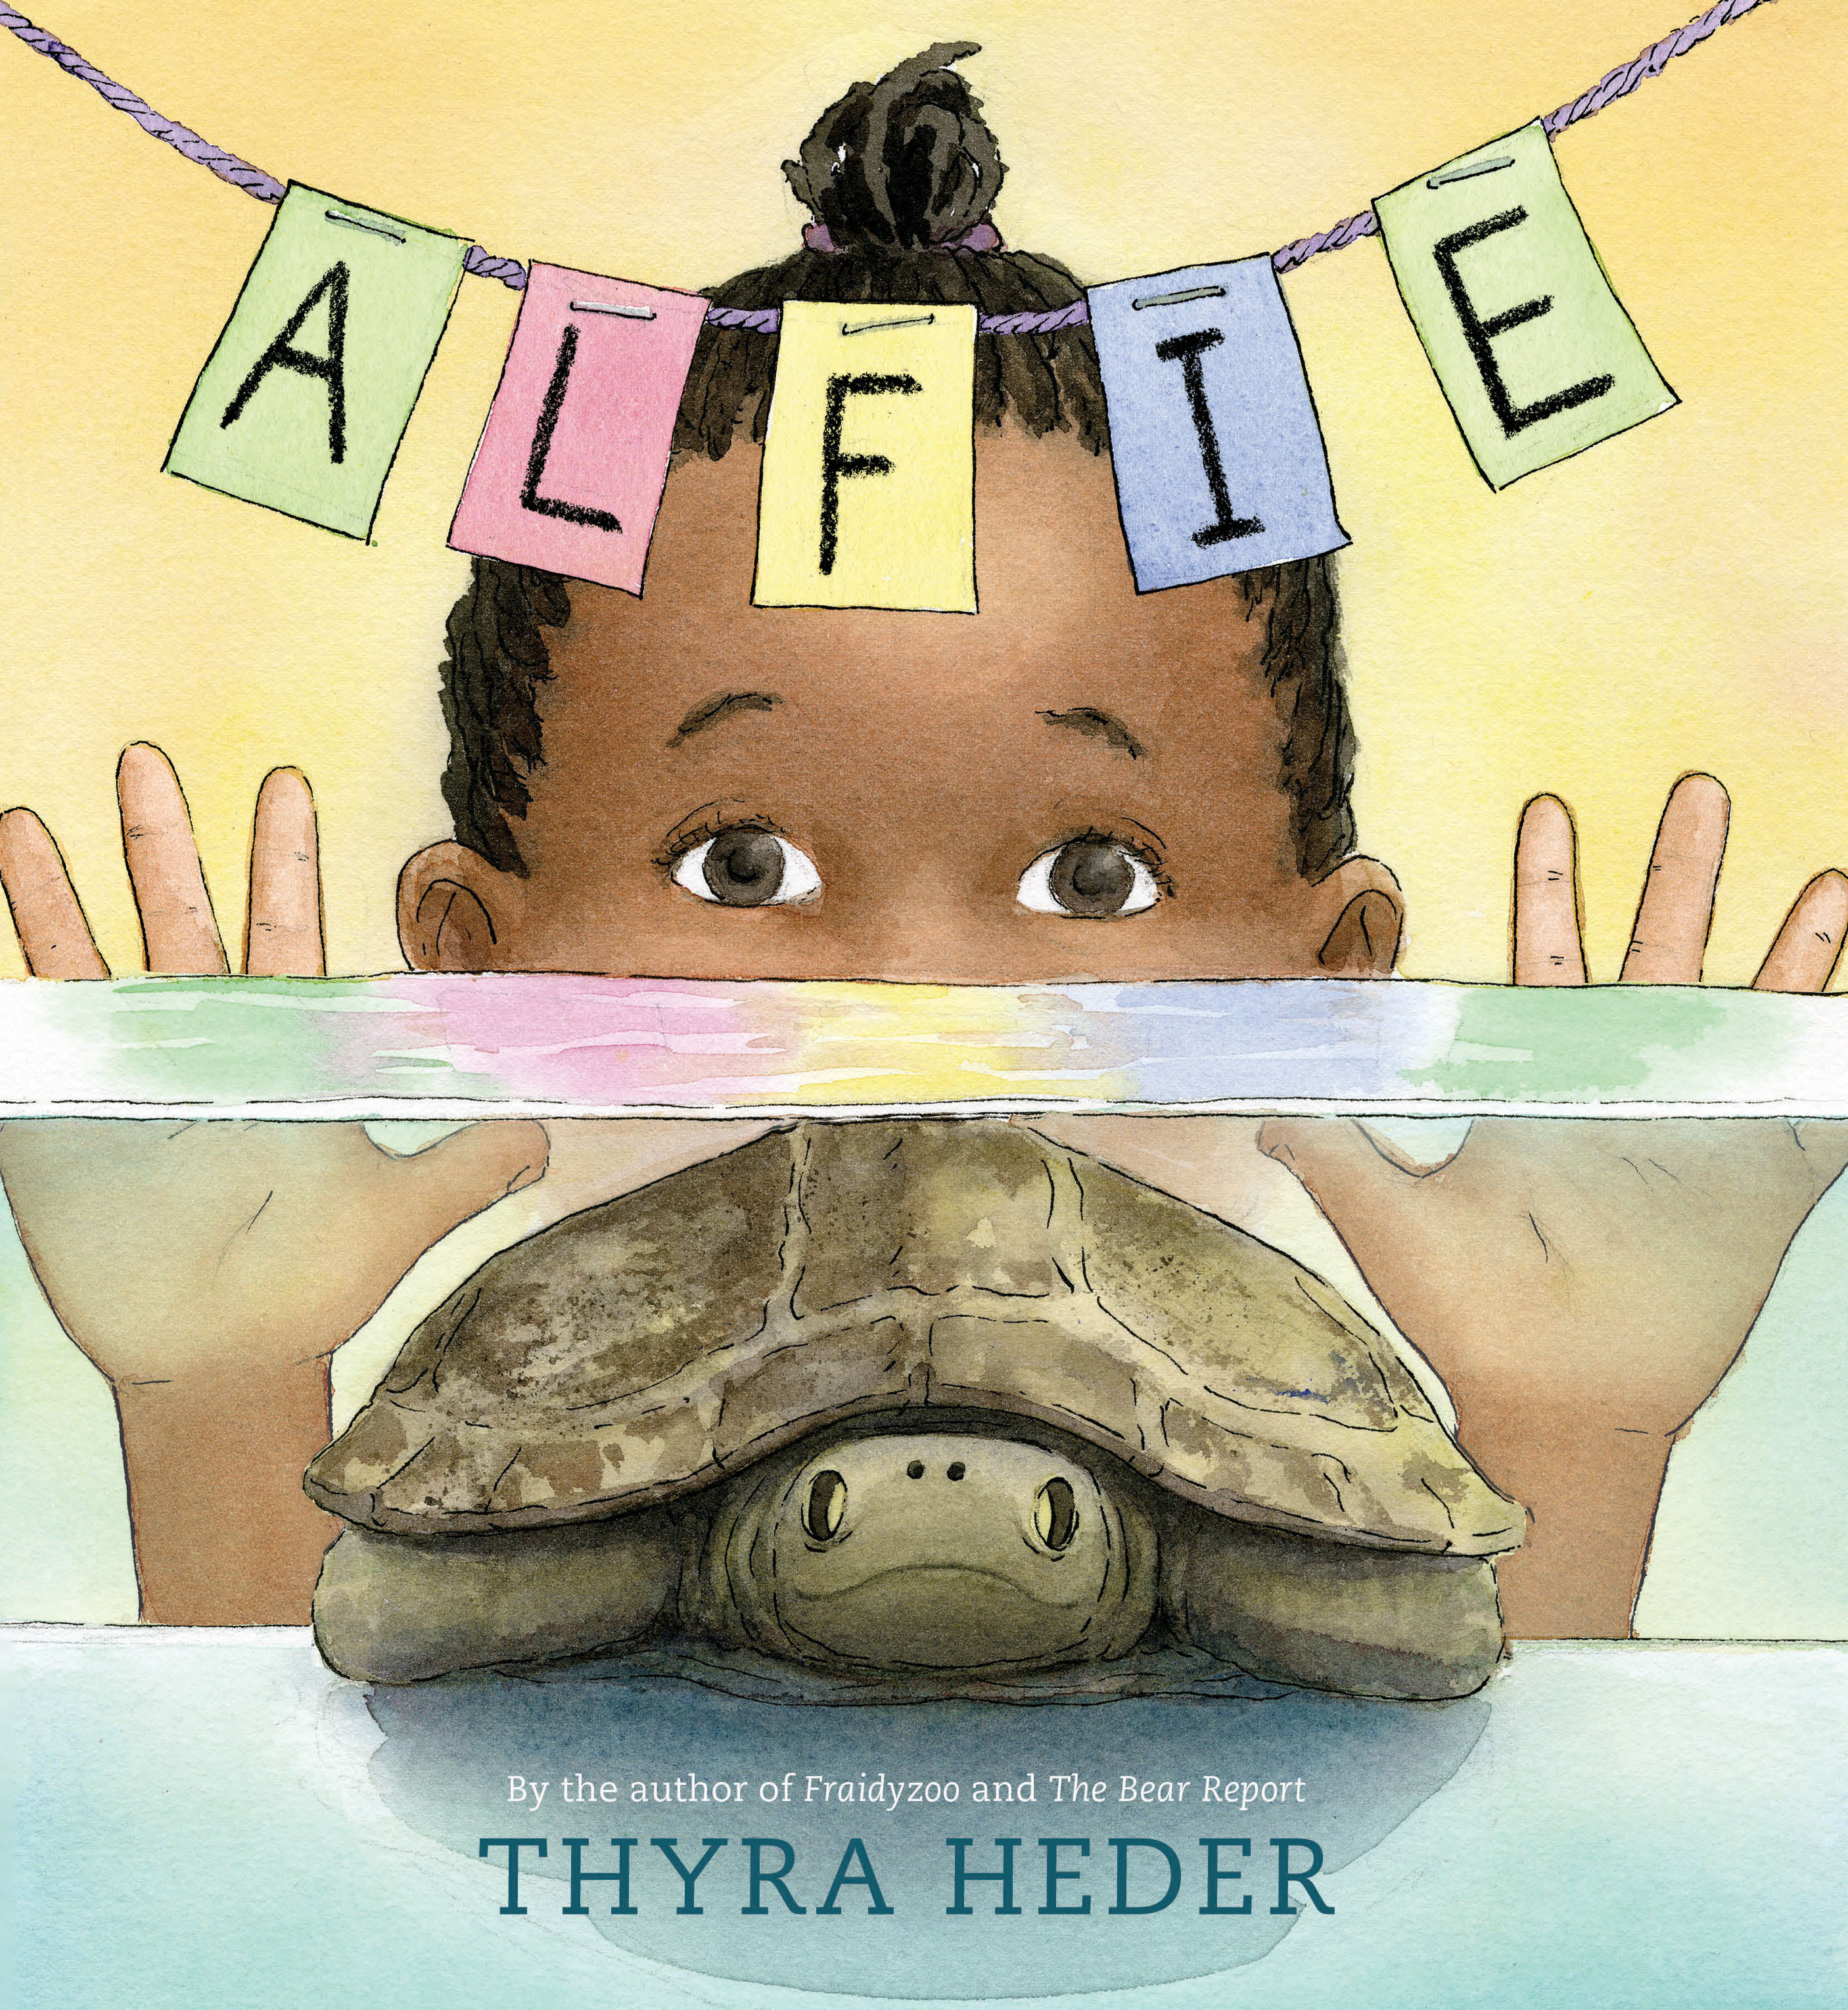 Sunday Story Time with Thyra Heder (Author & Illustrator of Alfie)